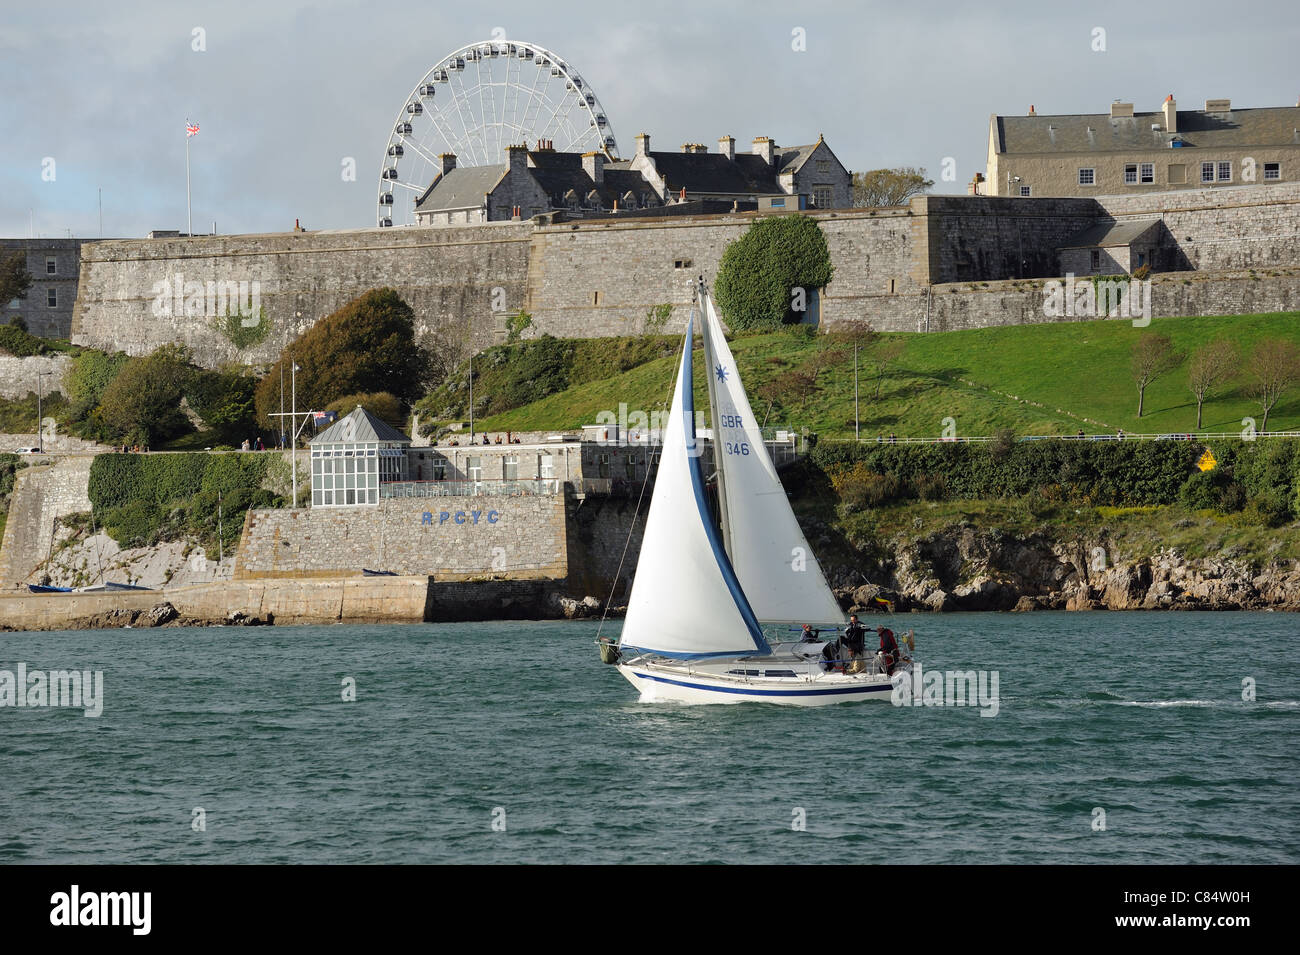 Sailing off the Devonshire coast at Plymouth England UK Yacht passing the historic RPCYC Stock Photo